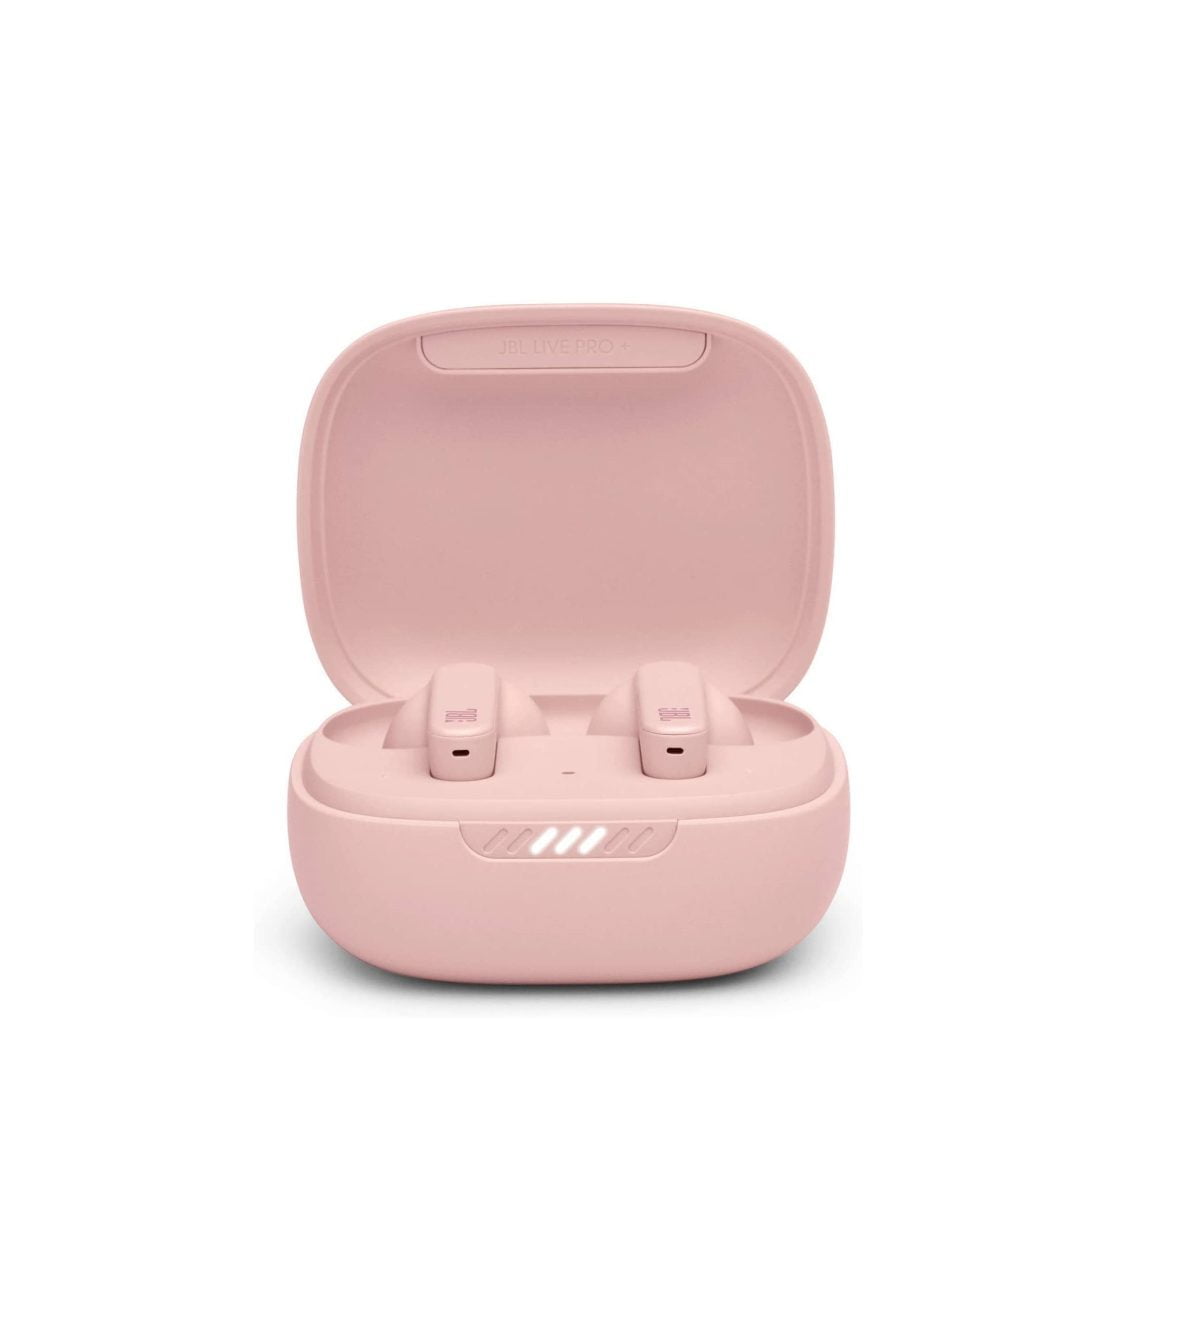 61Zmsm48Zgl. Ac Sl1500 Jbl &Lt;H1&Gt;Jbl Live Pro Plus True Wireless Noise Cancelling Earbuds-Pink&Lt;/H1&Gt; Https://Www.youtube.com/Watch?V=Oan6Moxjv58 &Nbsp; The Best Audio Solution Not Matter The Device, Jbl Live Pro+ Tws Delivers An Immersive True Wireless Experience With Incredible Jbl Signature Sound. Let Smart Ambient Connect You To Your Environment, Or Focus On The Music With Adaptive Noise Cancelling. Then Switch Easily From Tunes To Group Calls With 4 Mics (2 Beamforming Mics Per Side) To Capture Your Voice With The Feeling Of Face-To-Face Conversation And A Third Mic For Environmental Noise Reduction. All Commands Are On The Earbuds, So You Can Manage Music And Calls With Your Finger Only. Jbl Earbuds Jbl Live Pro Plus Noise Cancelling Earbuds-Pink